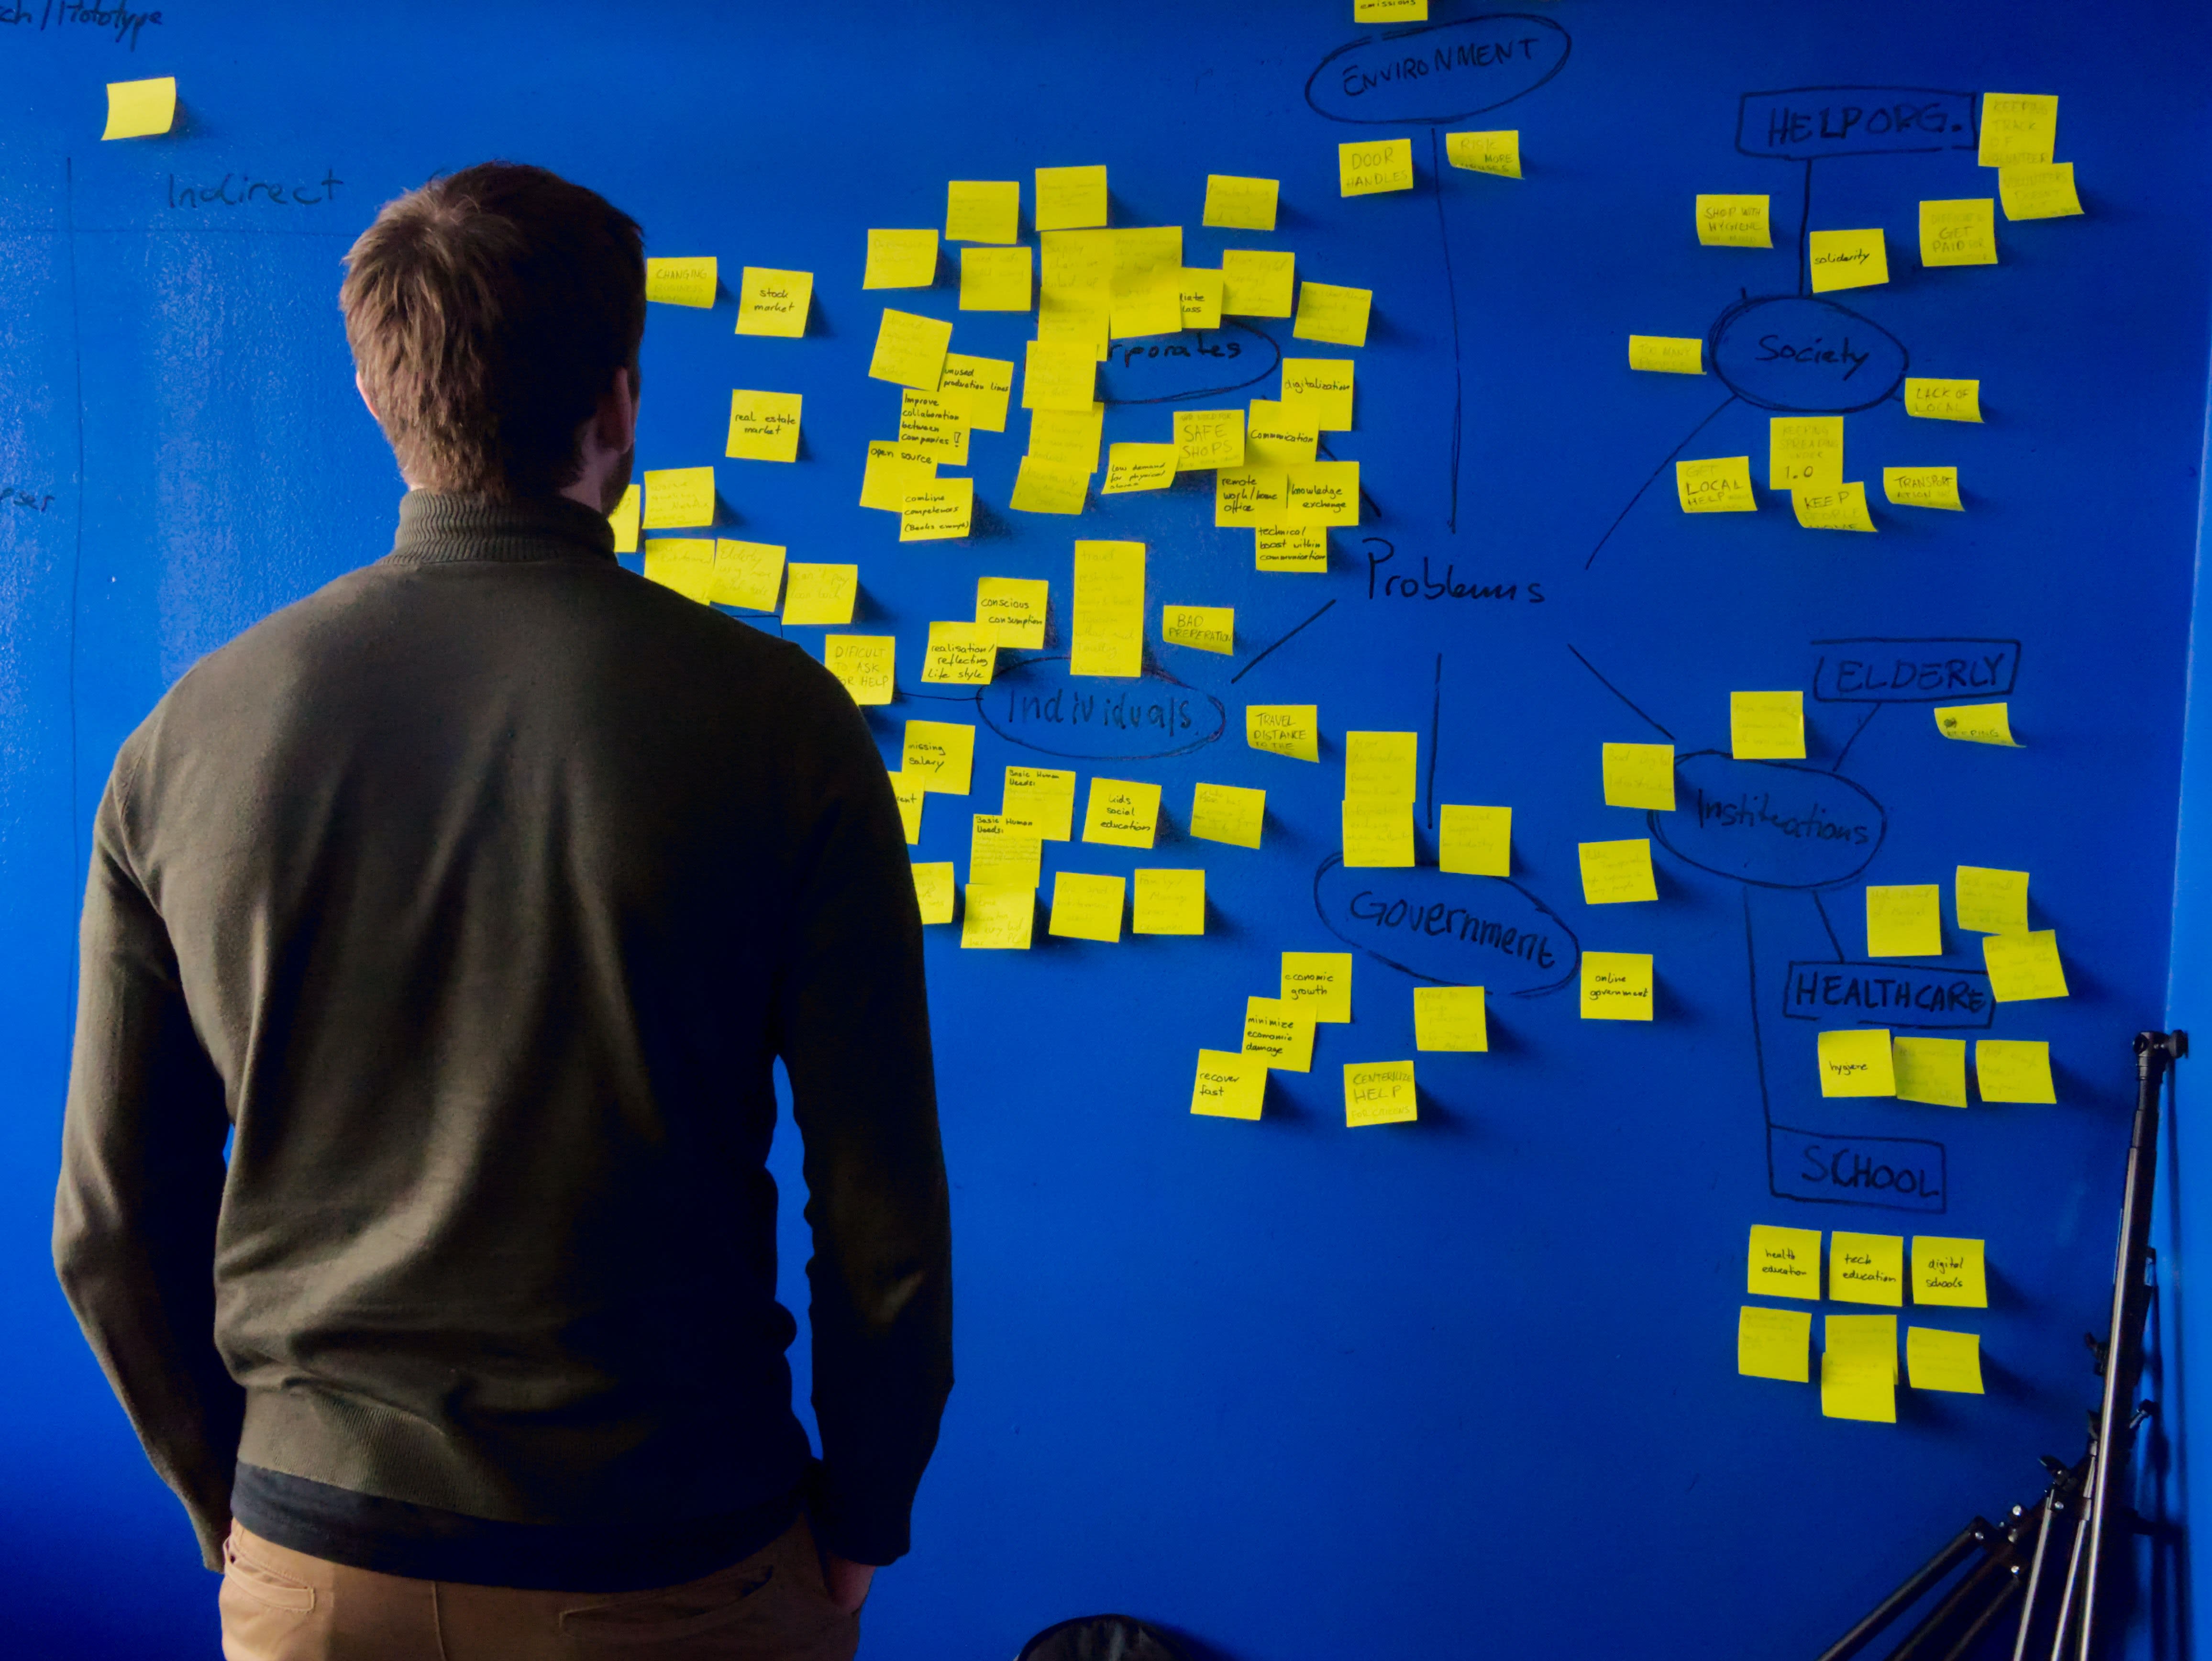 man standing in front of a blue board with yellow note stickers during a brainstorming session